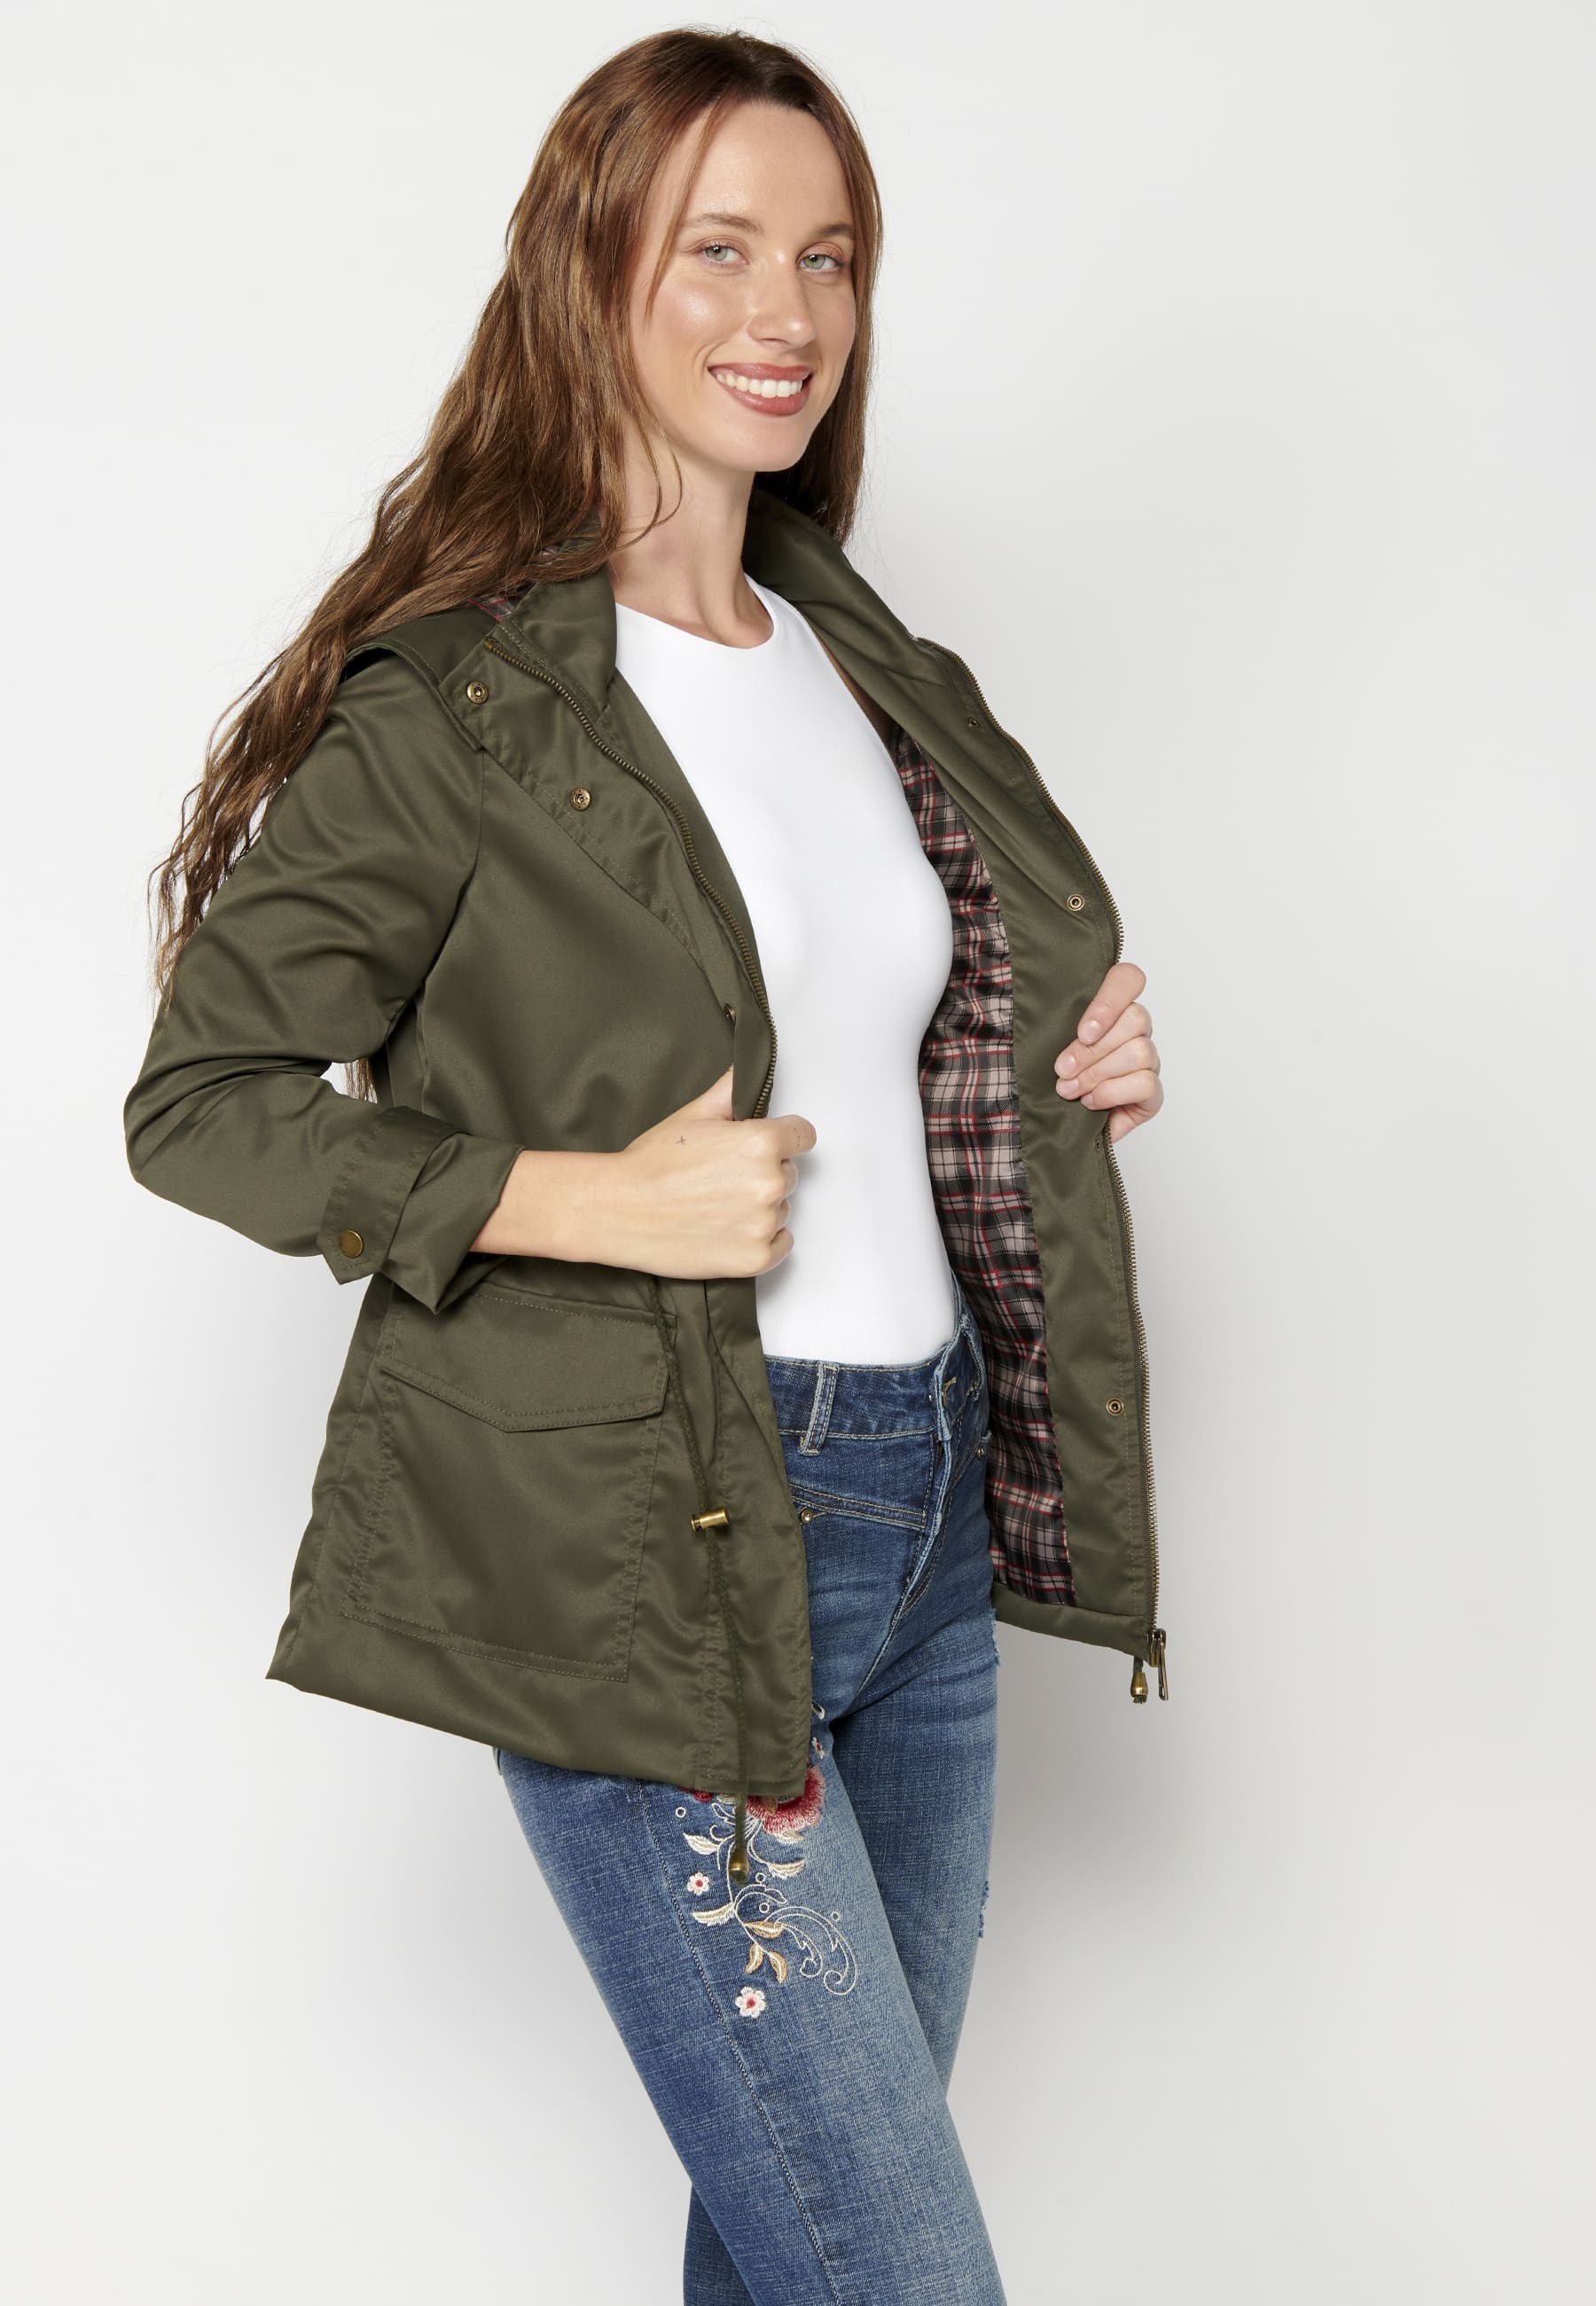 Short Parka Jacket with Hood for Women